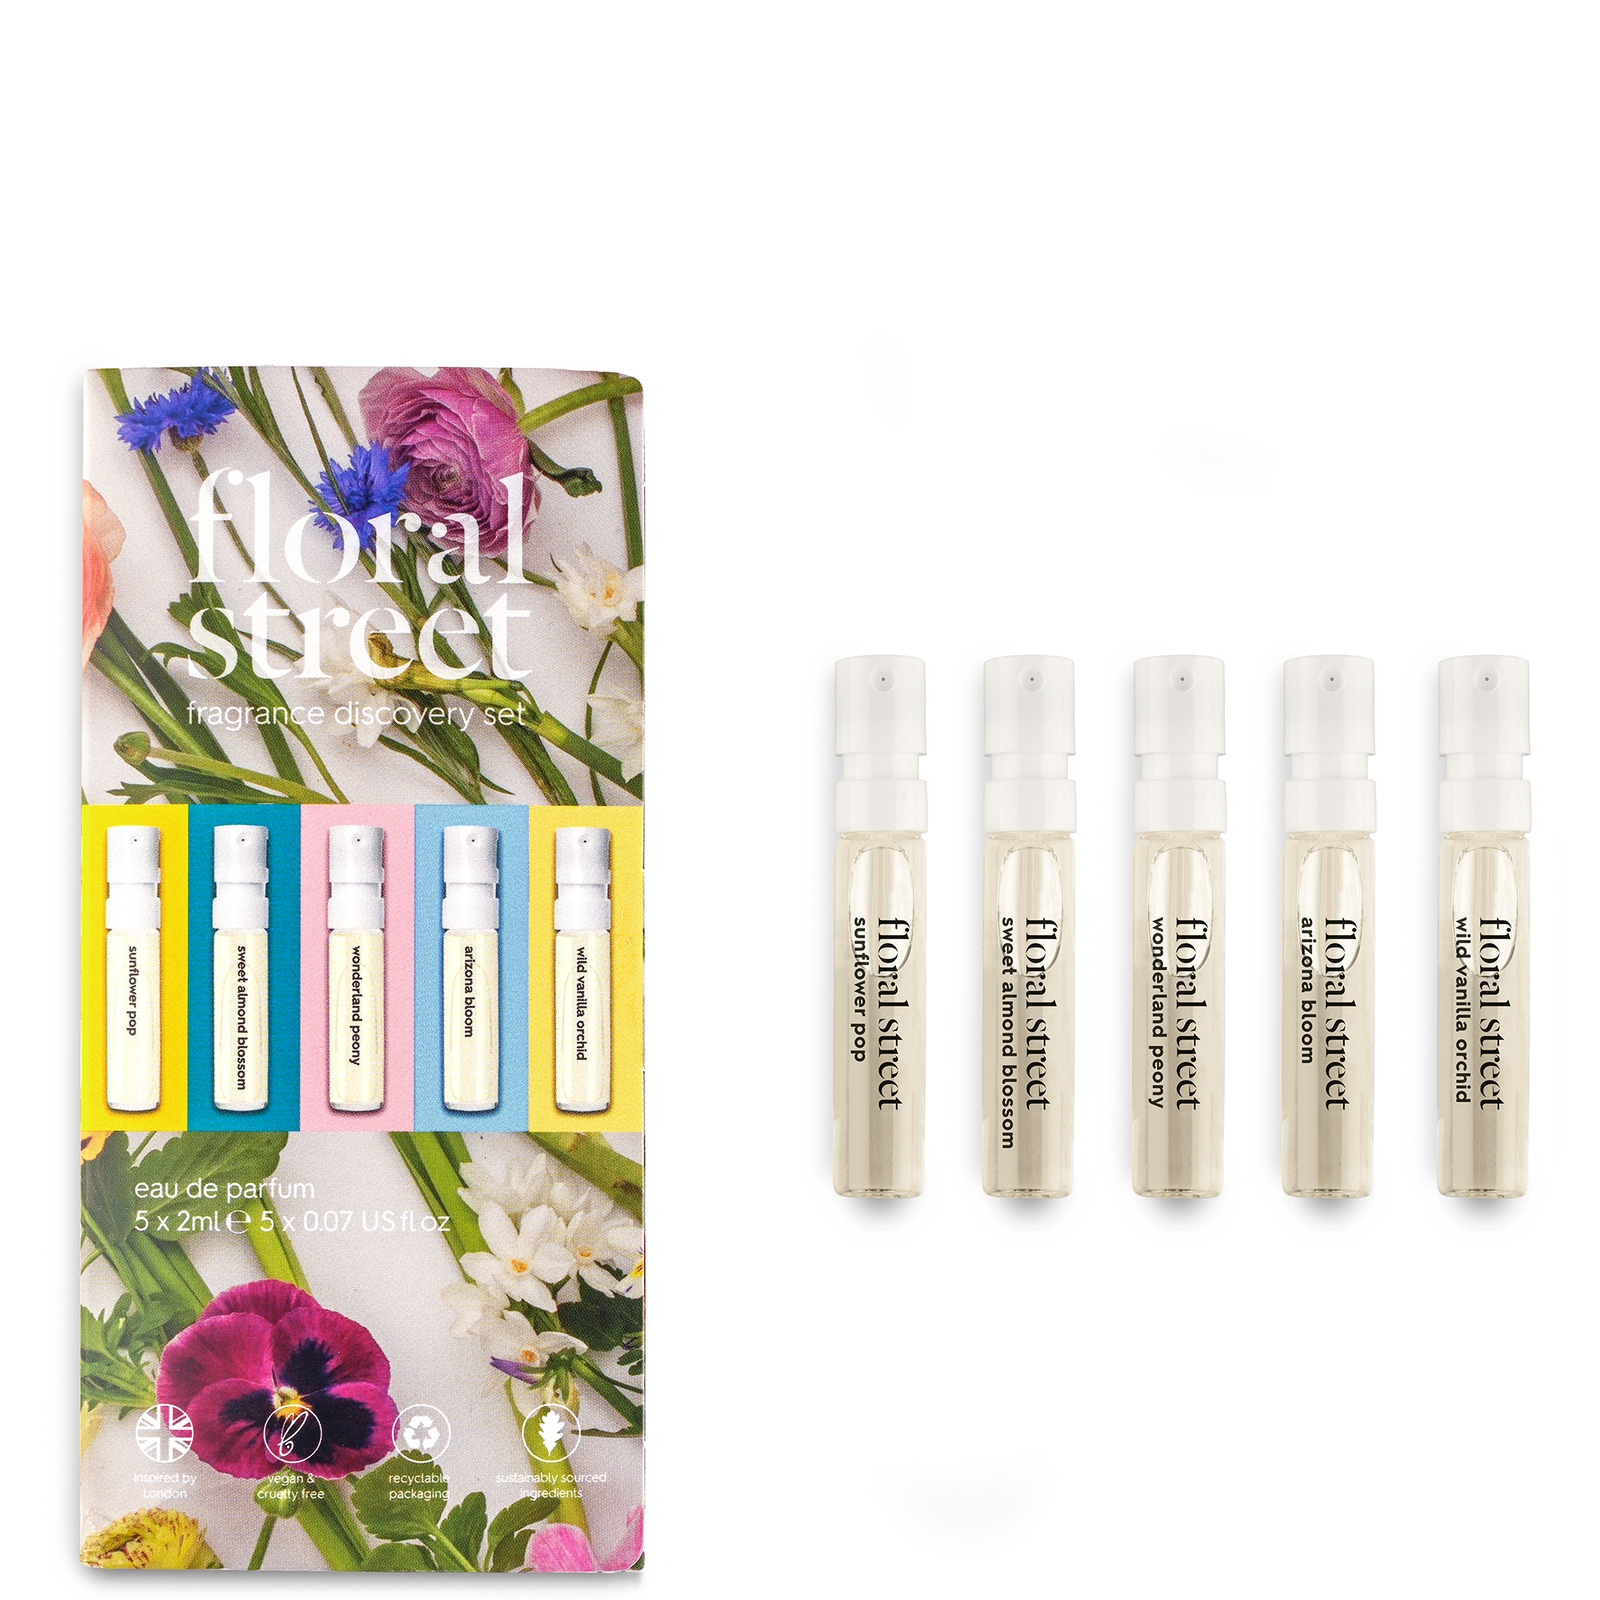 Image of Floral Street 5 x 2ml Discovery Set